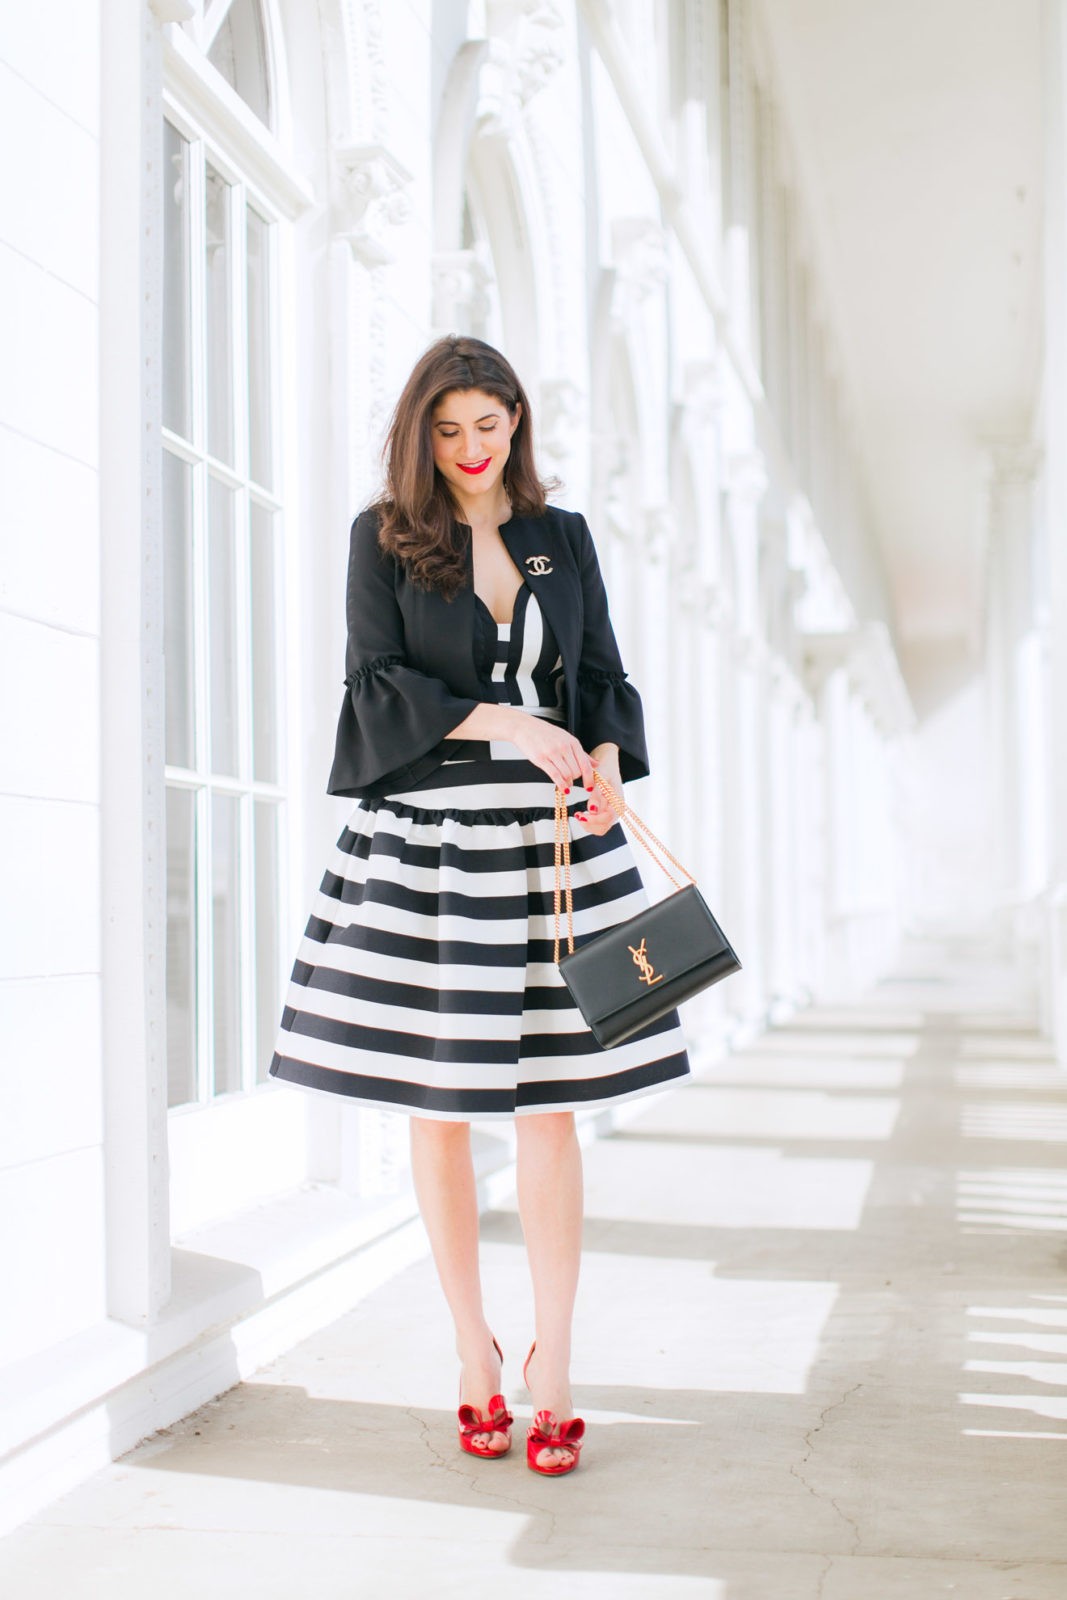 Laura Lily Fashion Travel and Lifestyle Blog, 12 Days of Holiday Style Striped Dress, A Striped Dress and Giving Tuesday, Asos Striped Dress, Valentino Bow Pumps, 